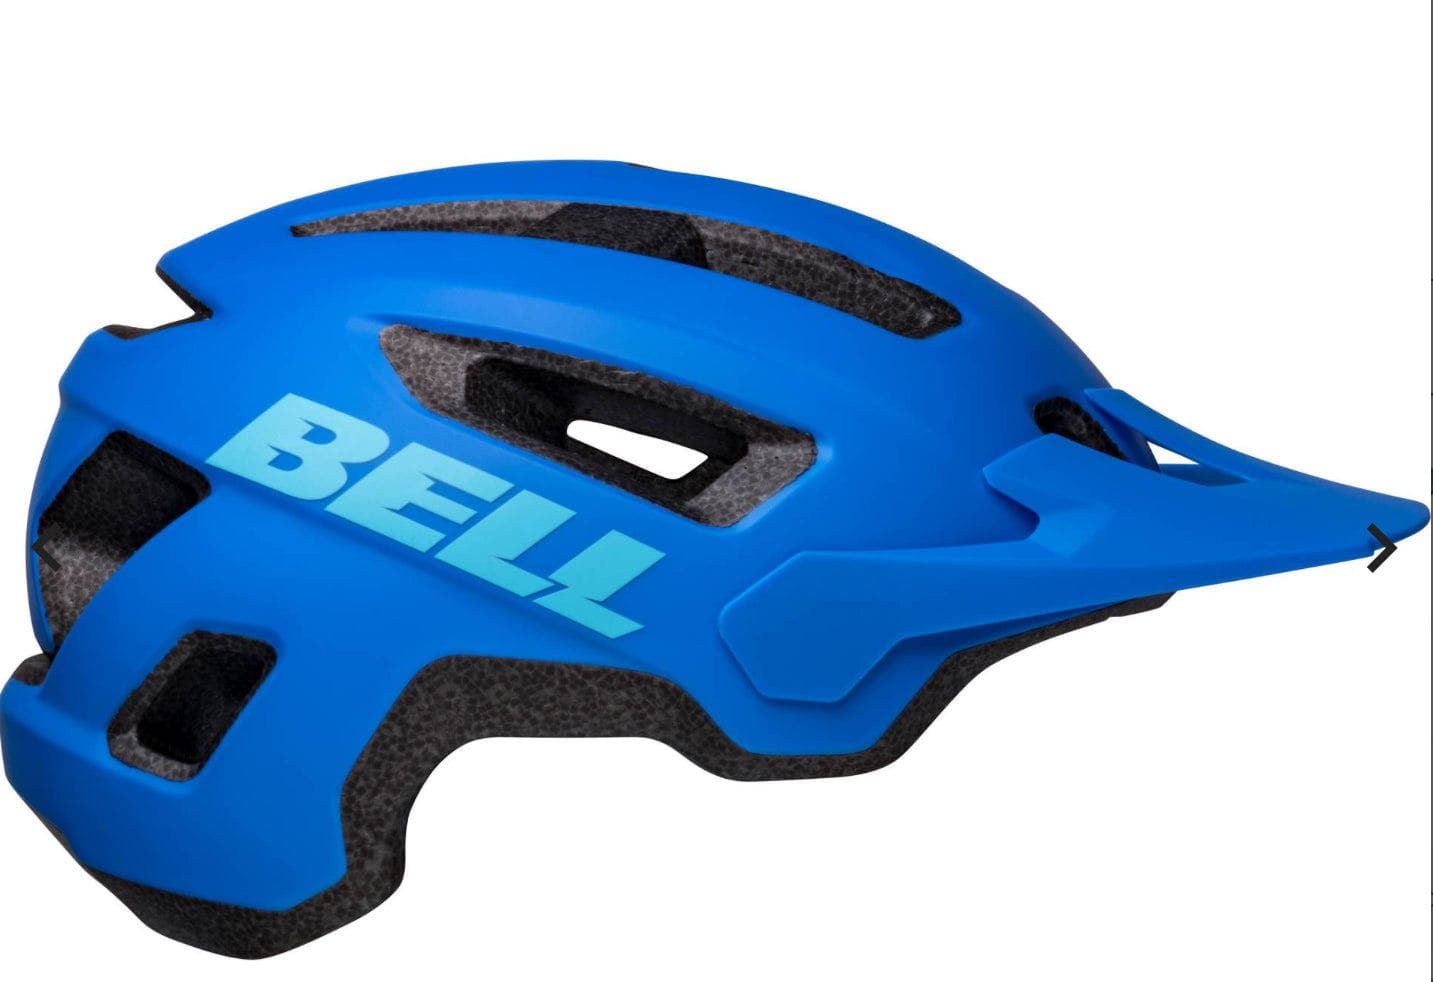 Bell Accessory S/M / Blue Nomad 2 Mips